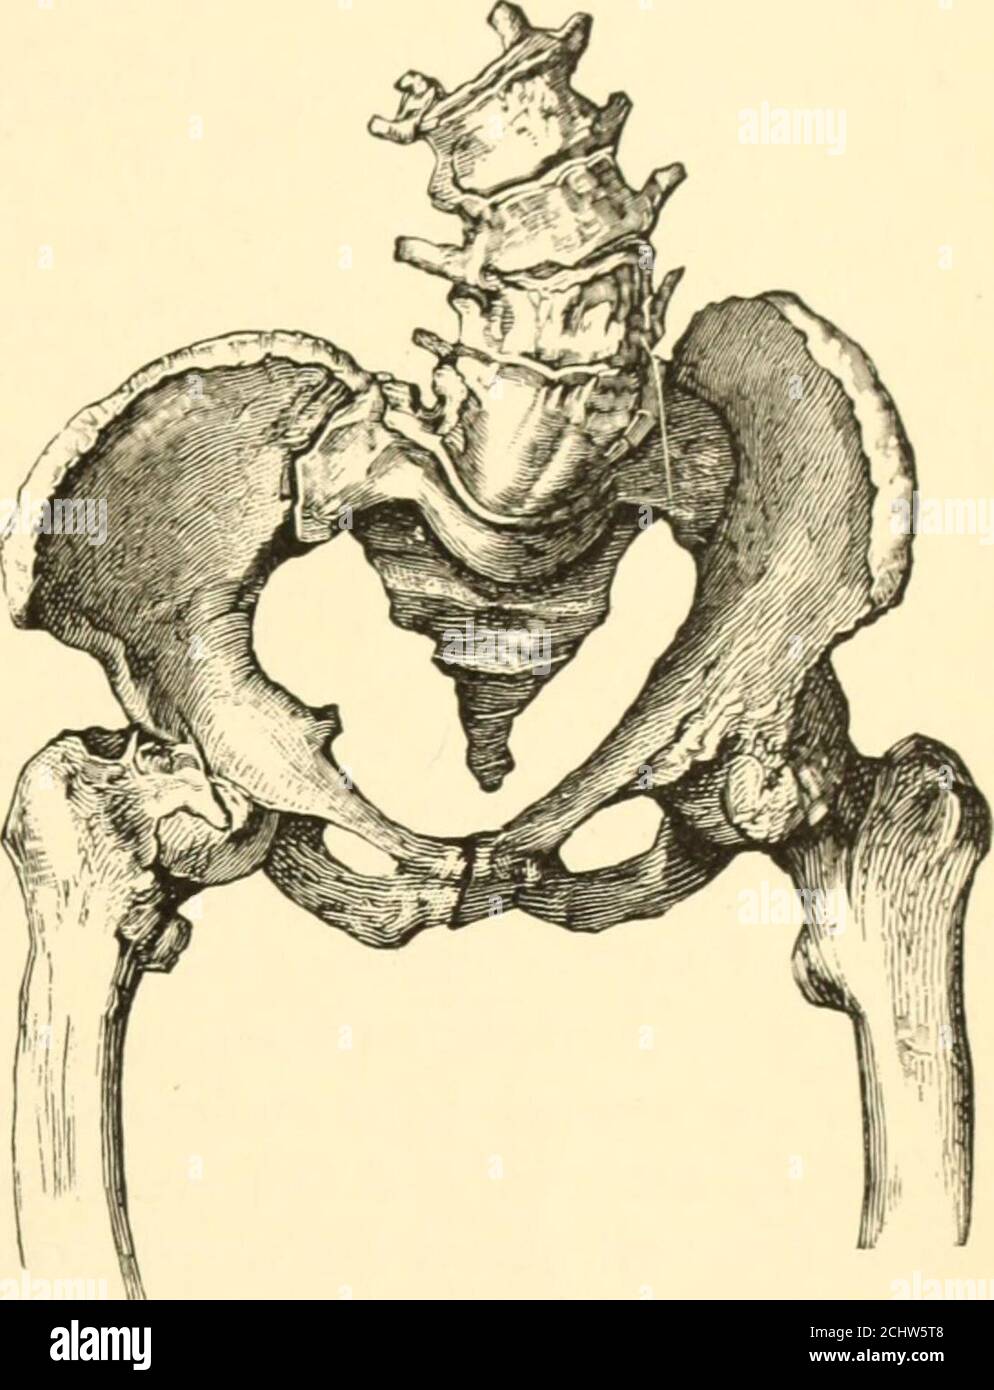 . The science and art of midwifery . lted backward, either the conjugata vera is increased or the previousrachitic antero-posterior narrowing is greatly diminished. In themovement of the sacrum upon its transverse axis the lower extremityis thrown forward, and the conjugate of the outlet is thereby reduced.Kyphosis, occurring at the beginning of rickets, diminishes the distancebetween the tuberosities of the ischia, but has little effect upon theinferior transverse diameter after the rachitic changes have once beenaccomplished. Influence of the Contracted Pelvis upon Pregnancy and Labor. The i Stock Photo